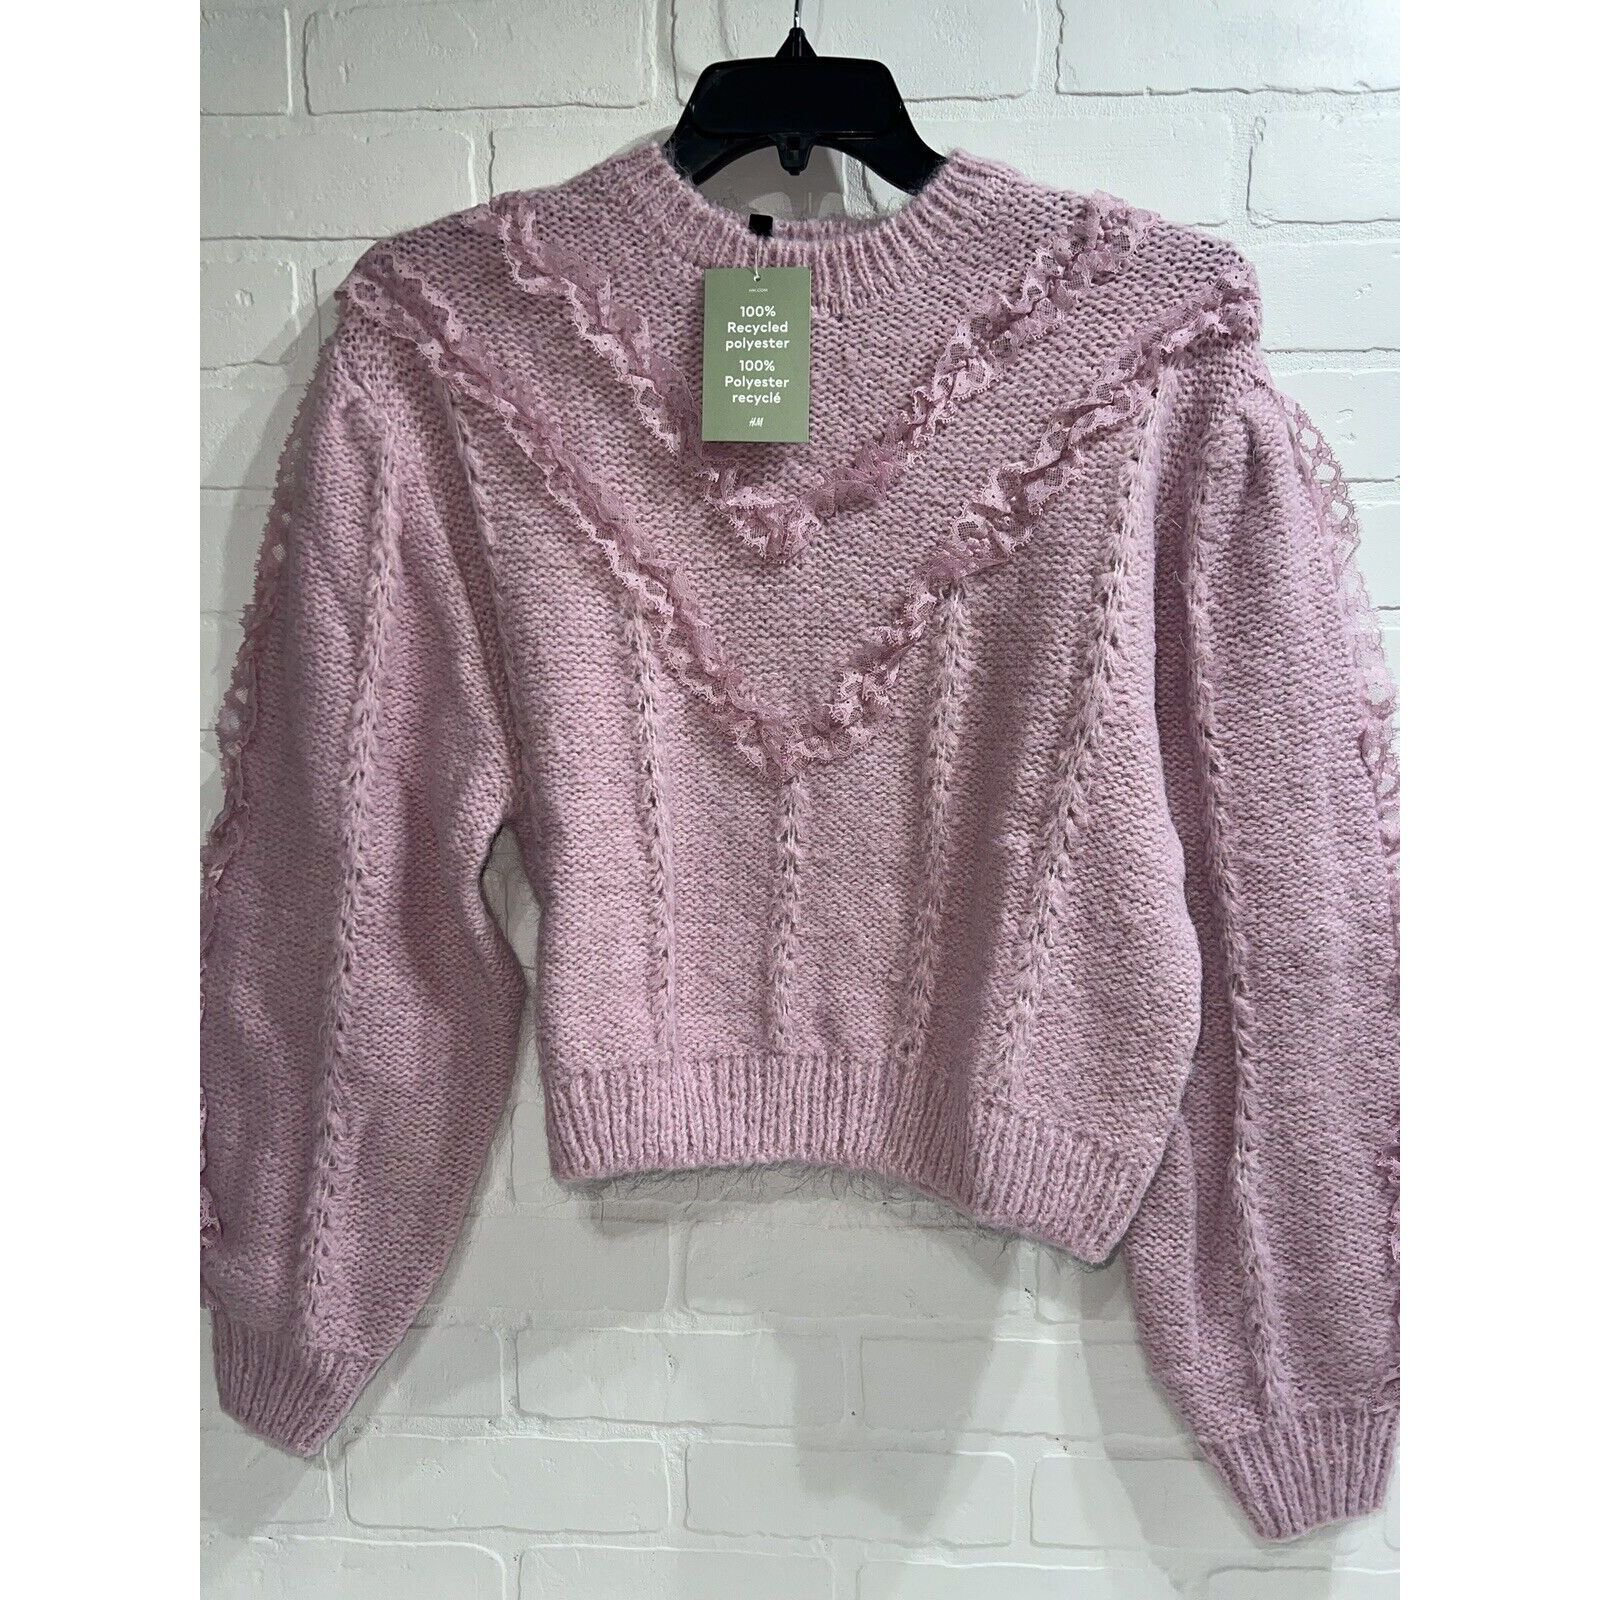 Authentic NWT! Divided by H&M Pink Ruffle Knit Pullover Sweater Size MEDIUM mXzlY6HMu just for you